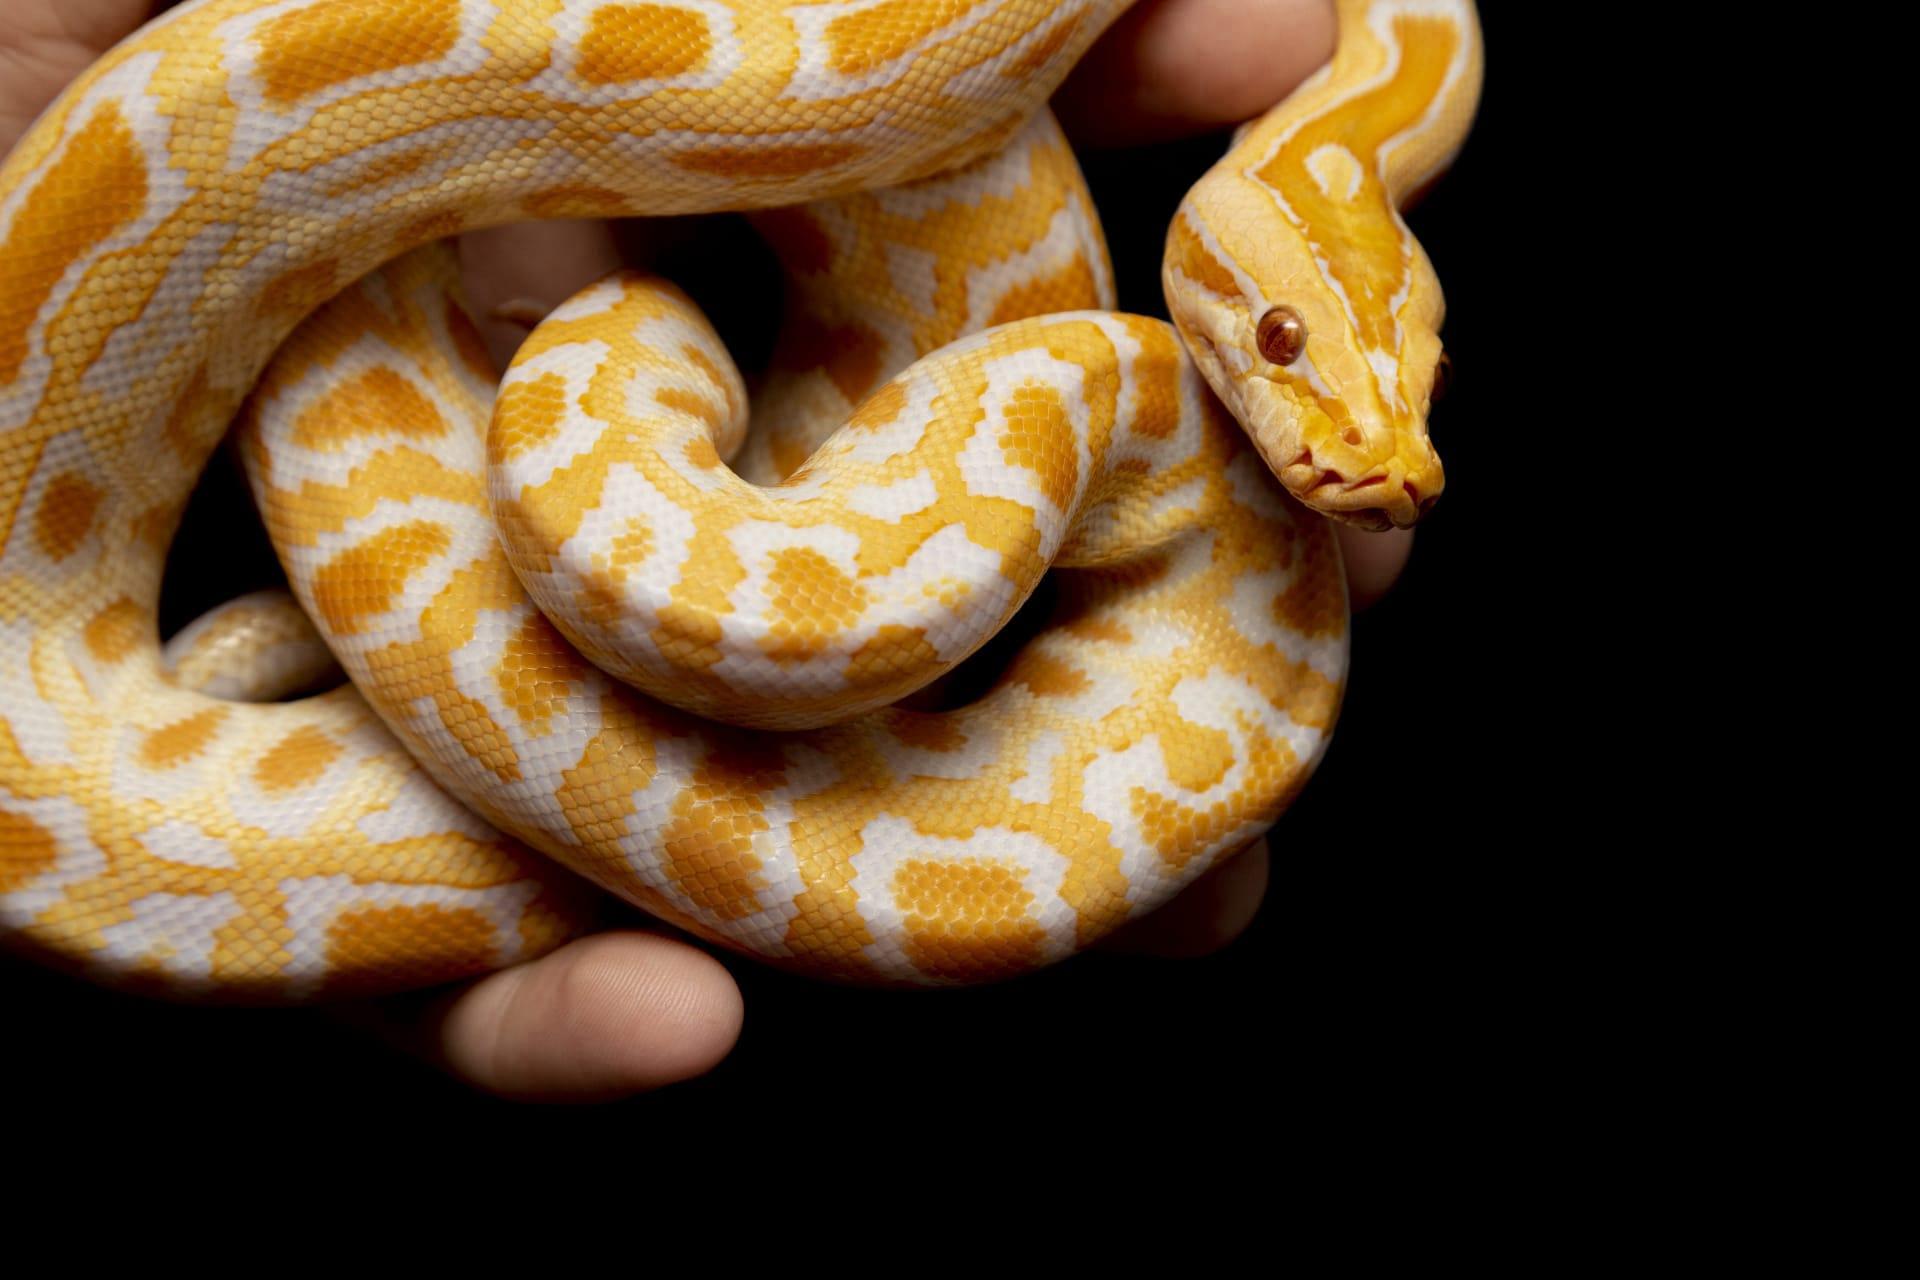 Ball python snake pictures